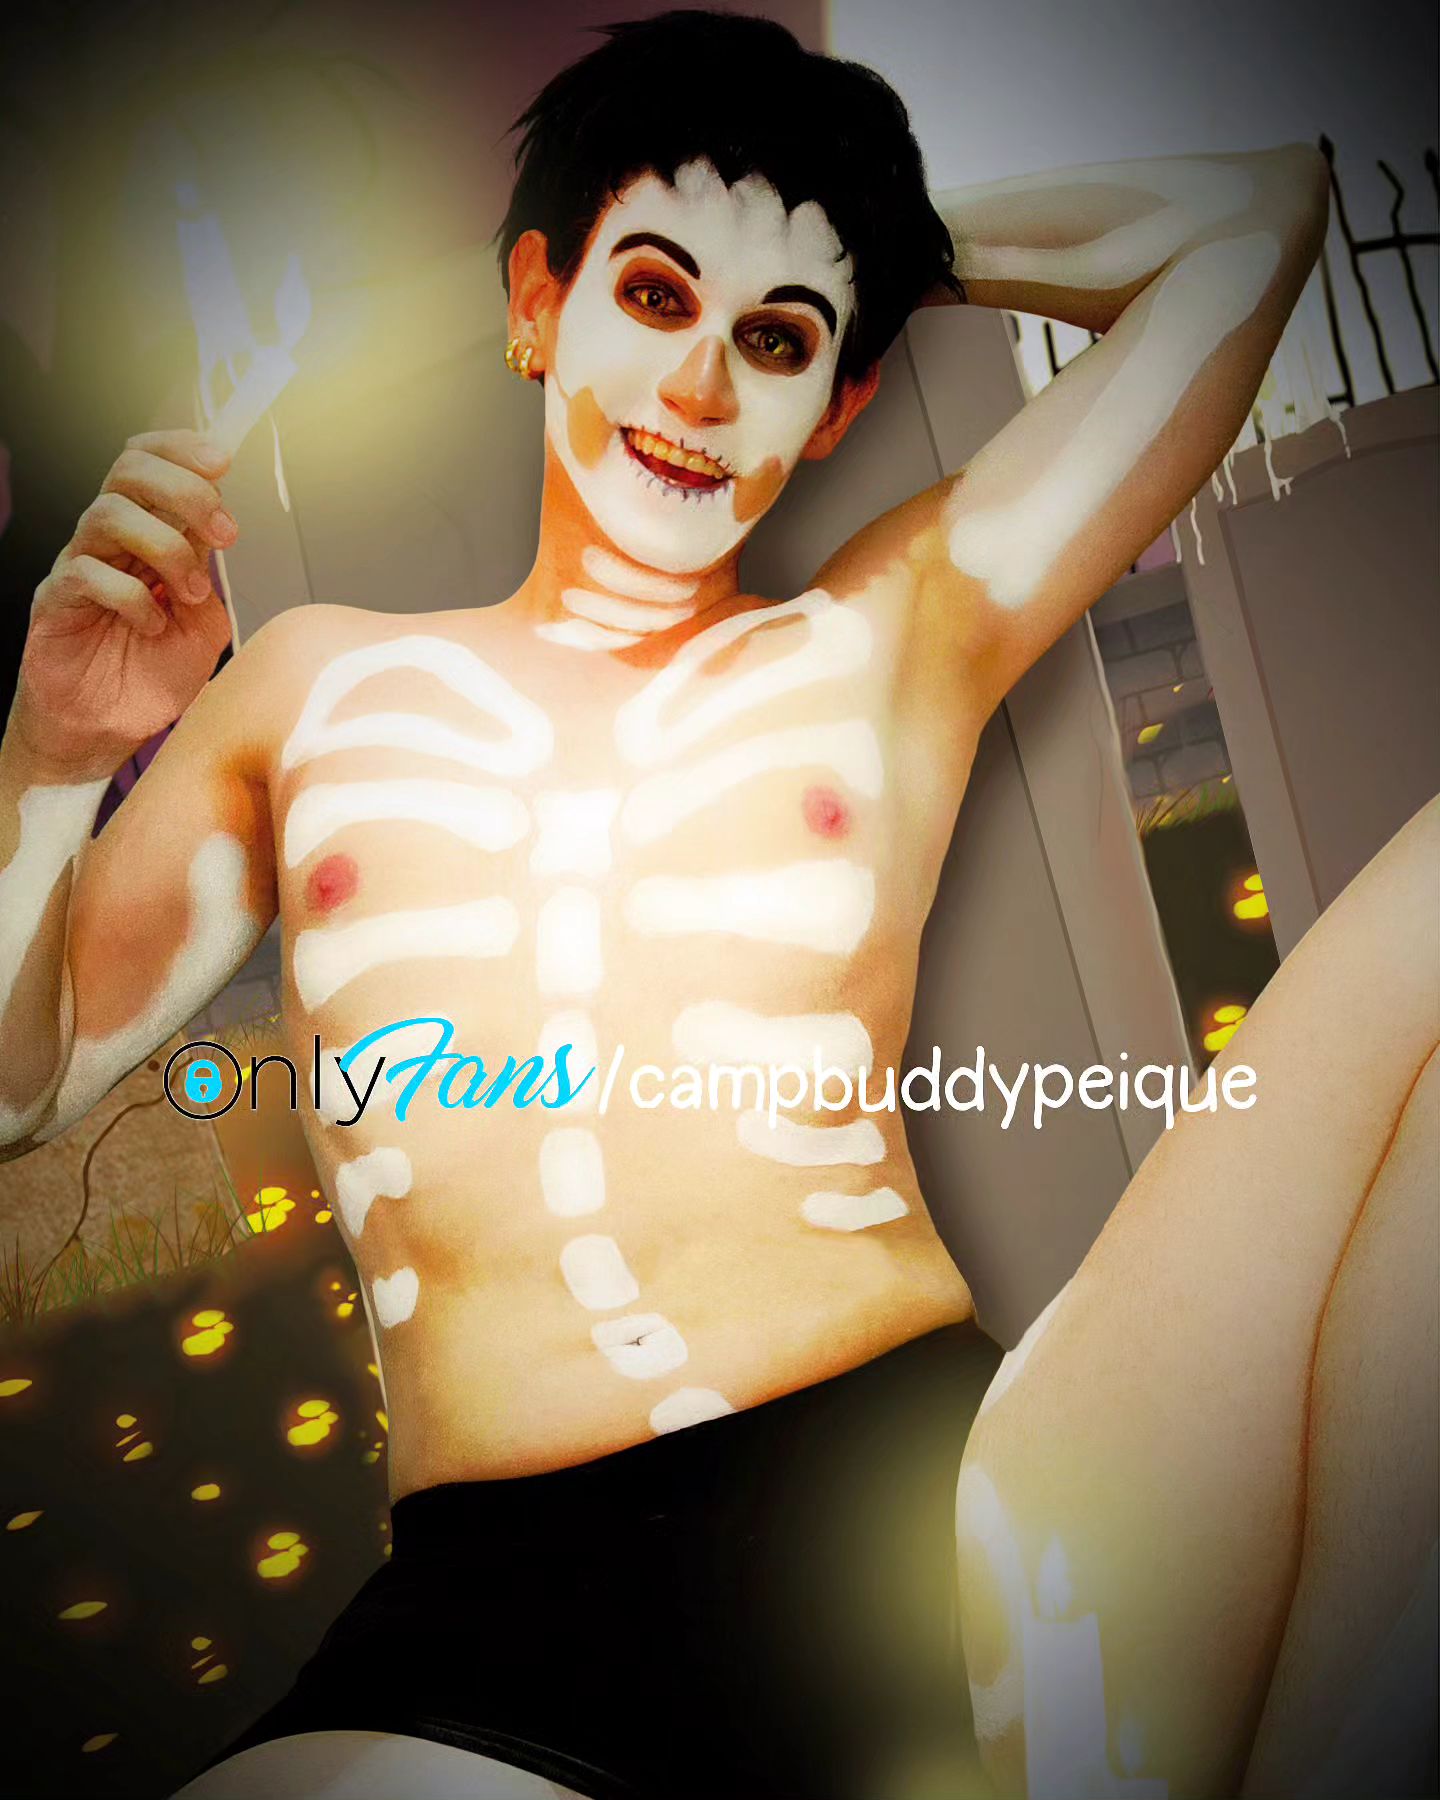 💀 Kieran's new set as a Neon Skelleton is coming out on my OnlyFans. Subscribe to see them. The link is on my profile.
.
.
#campbuddy #campbuddycosplay #kieranmoreno #kieran#kieranmorenocampbuddy #yaoi #gay #gayboy #nude